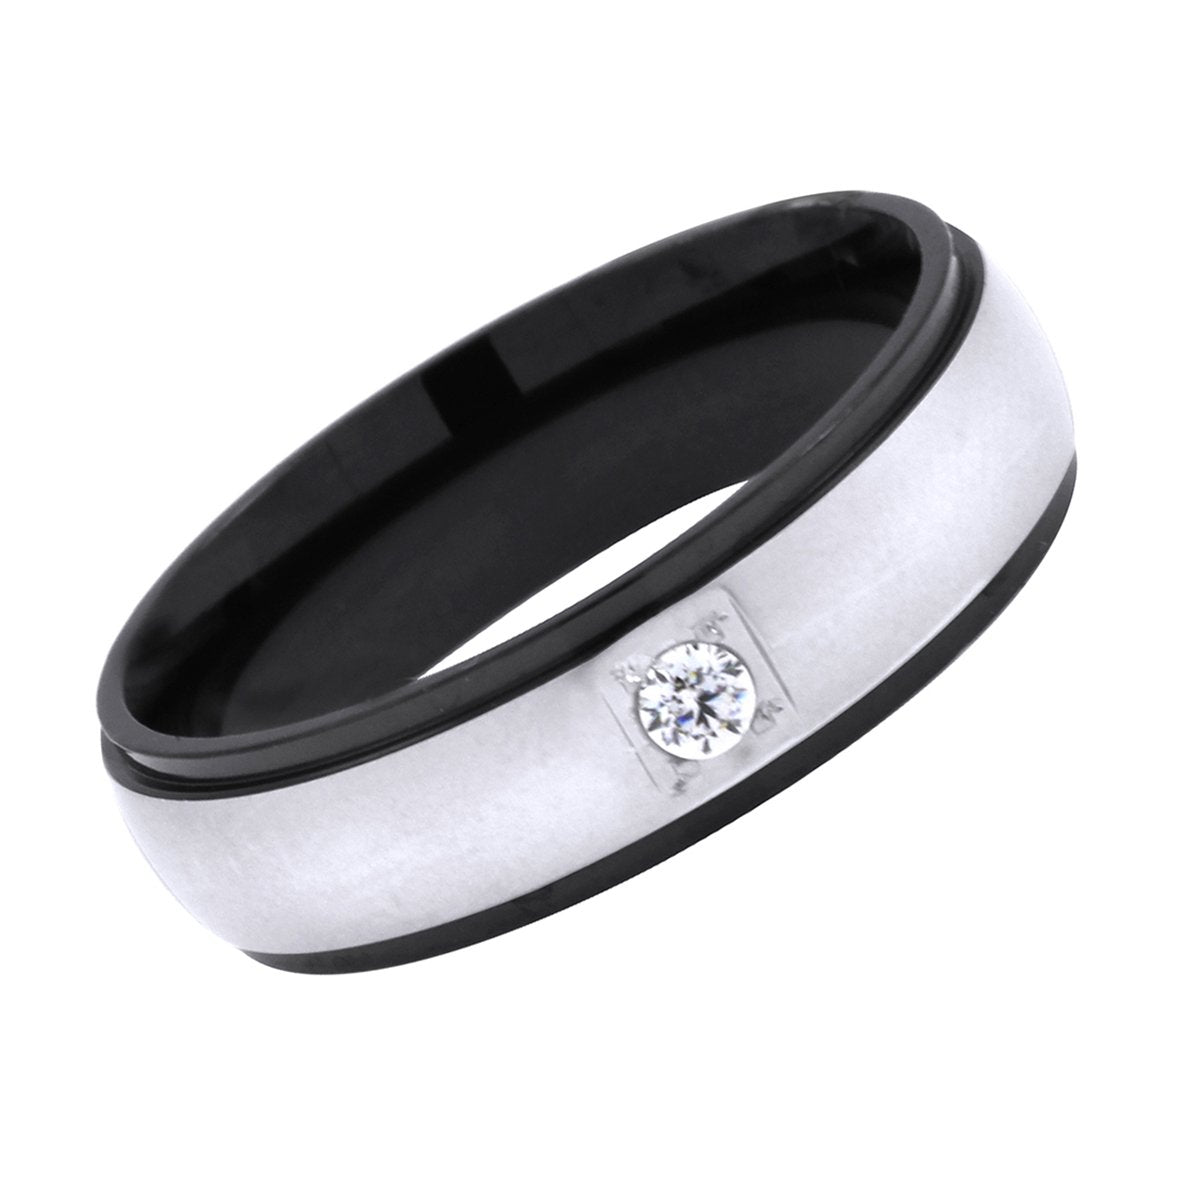 Buy Mens Ring Black Band Ring for Men Steel Pinky Rings Men Black Rings Men  Simple Plain Black Ring Mens Jewelry Rings Twistedpendant Online in India -  Etsy